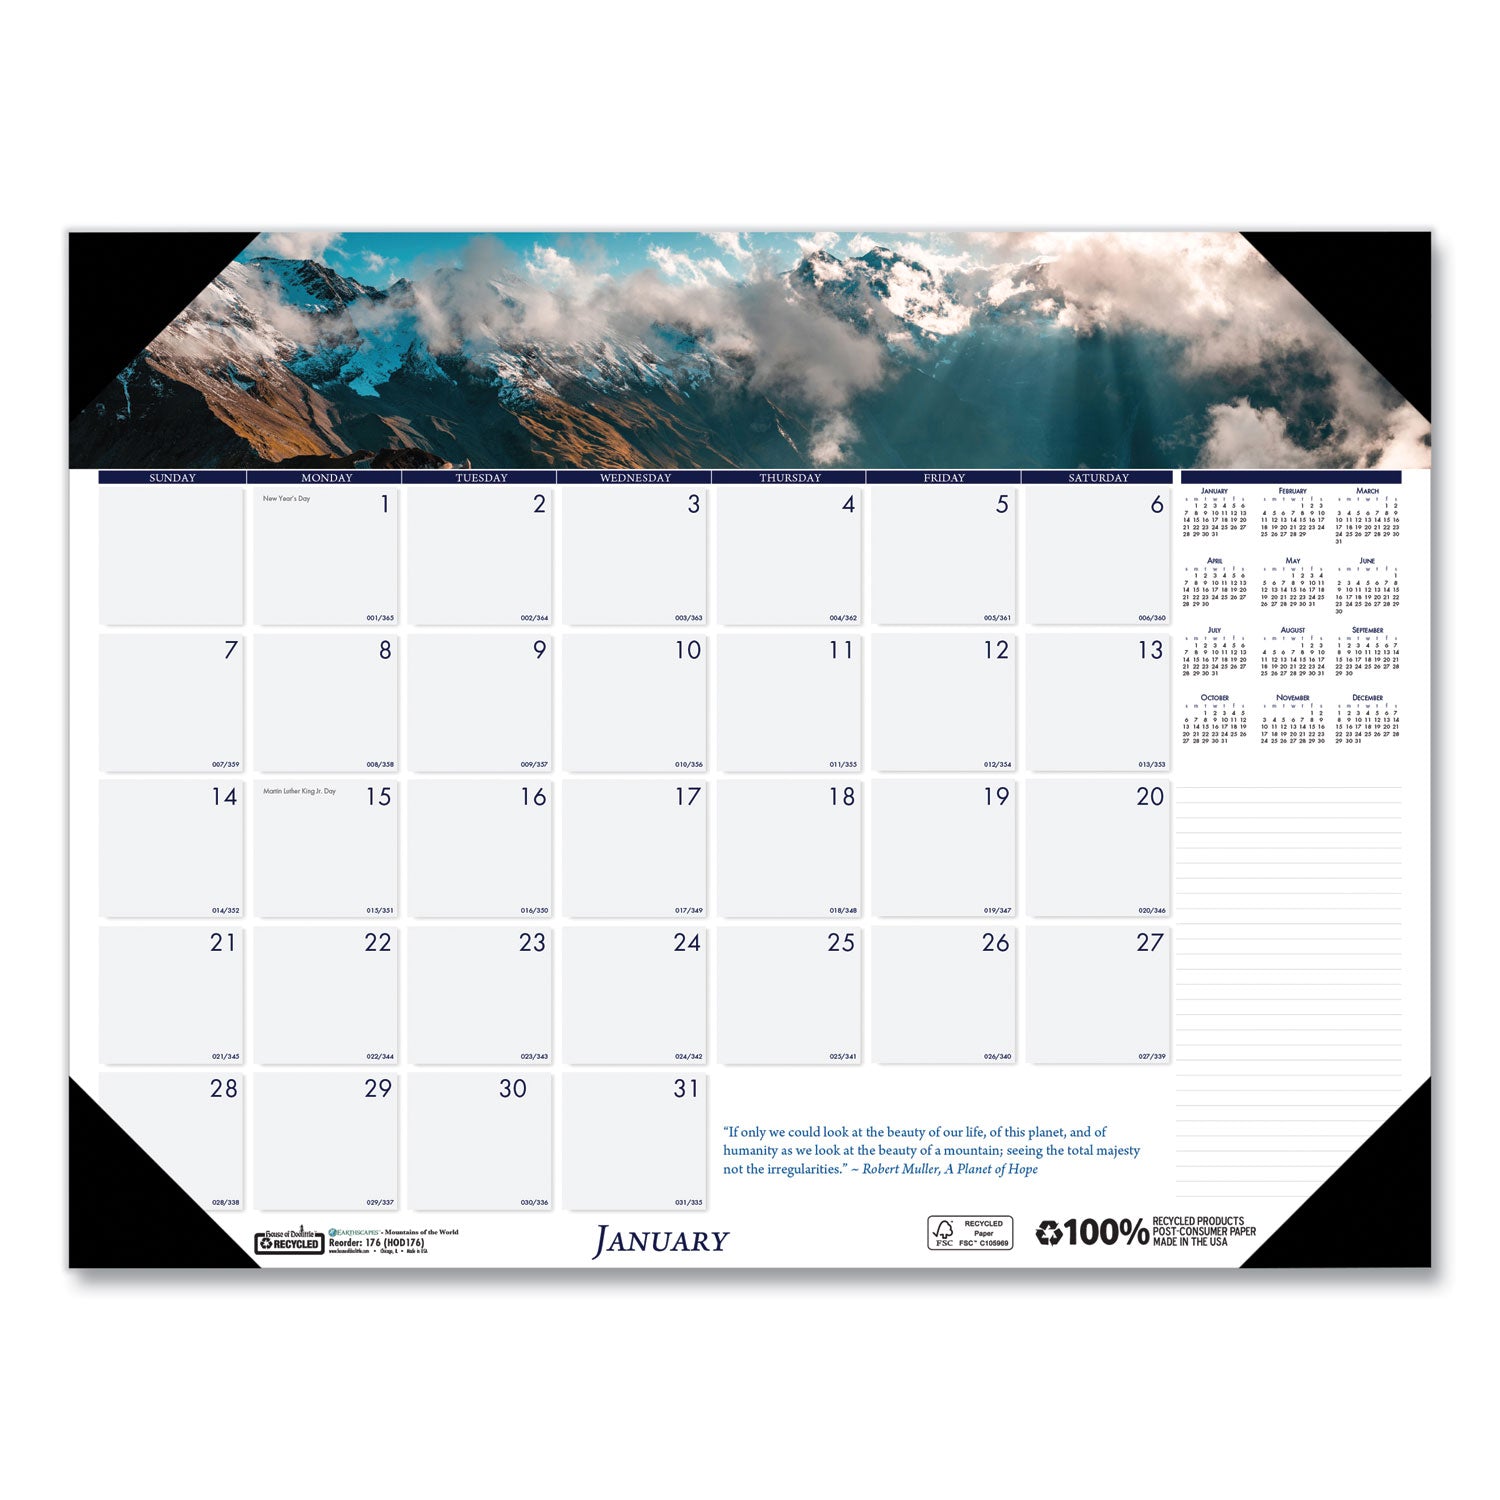 earthscapes-recycled-monthly-desk-pad-calendar-mountains-of-the-world-photos-22-x-17-black-corners12-monthjan-dec-2024_hod176 - 2